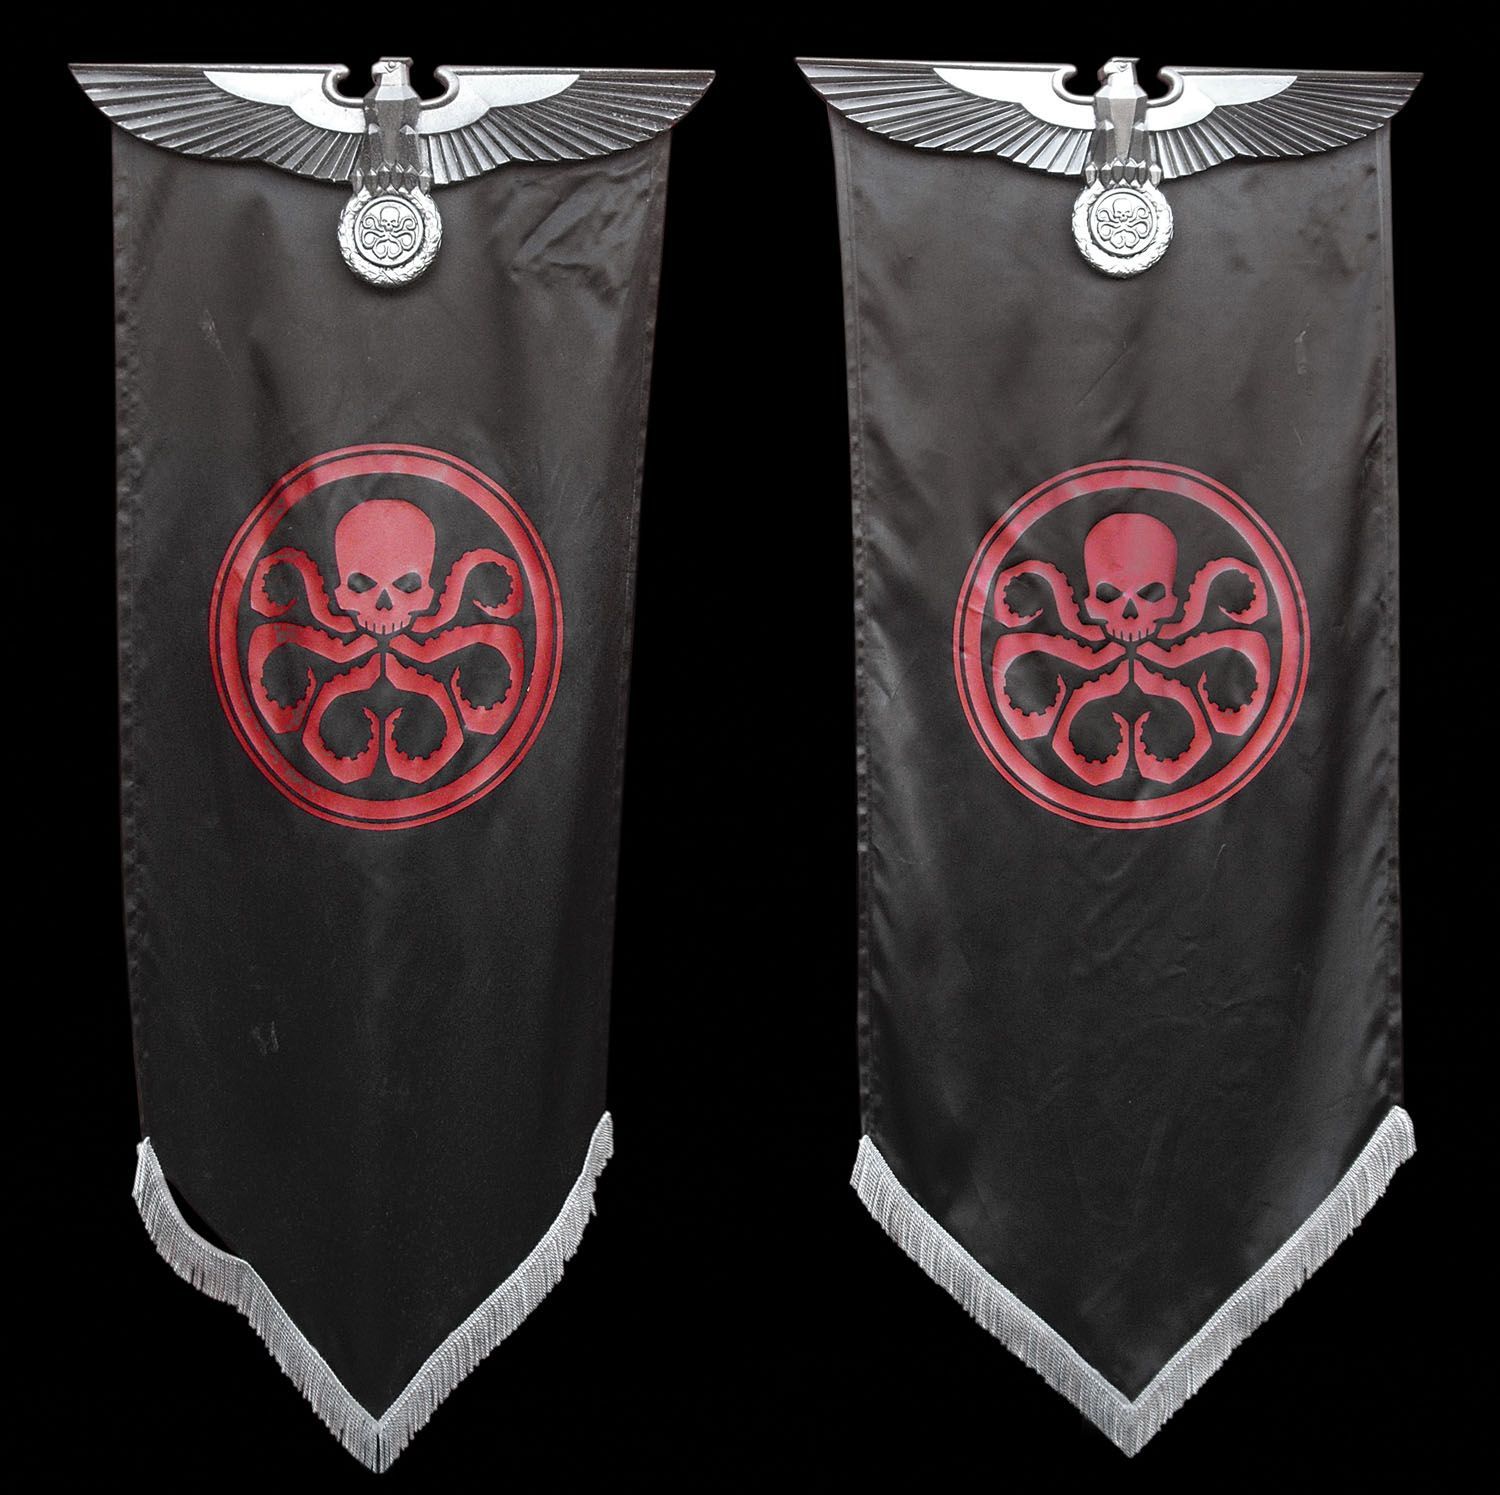 Pair of Hydra logo banners from Captain America The First Avenger.